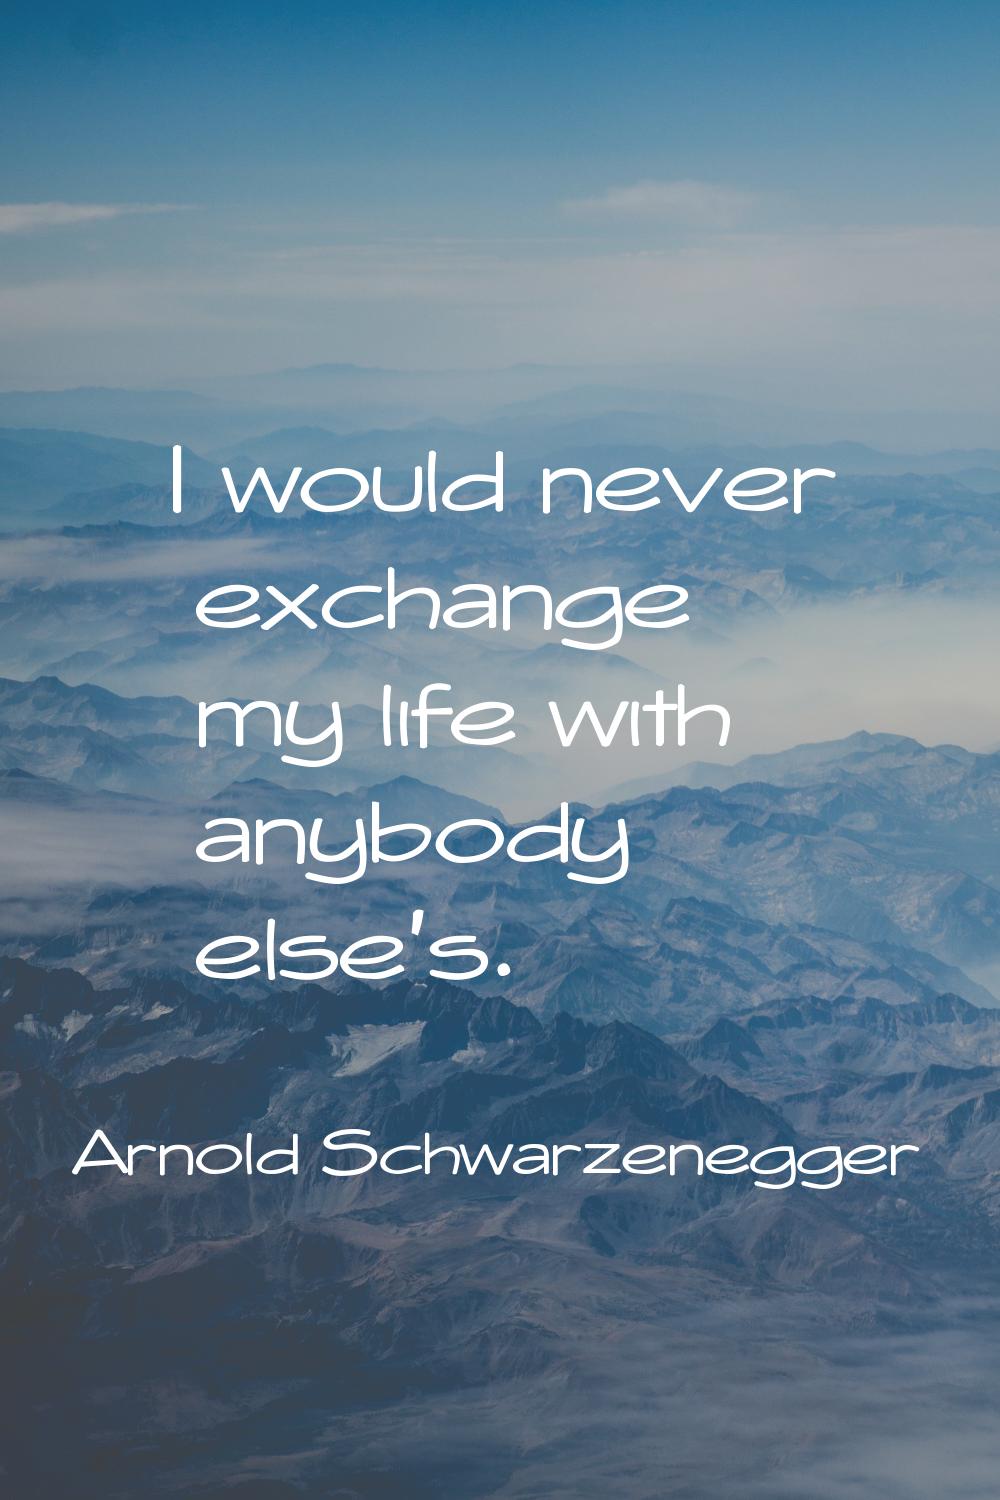 I would never exchange my life with anybody else's.